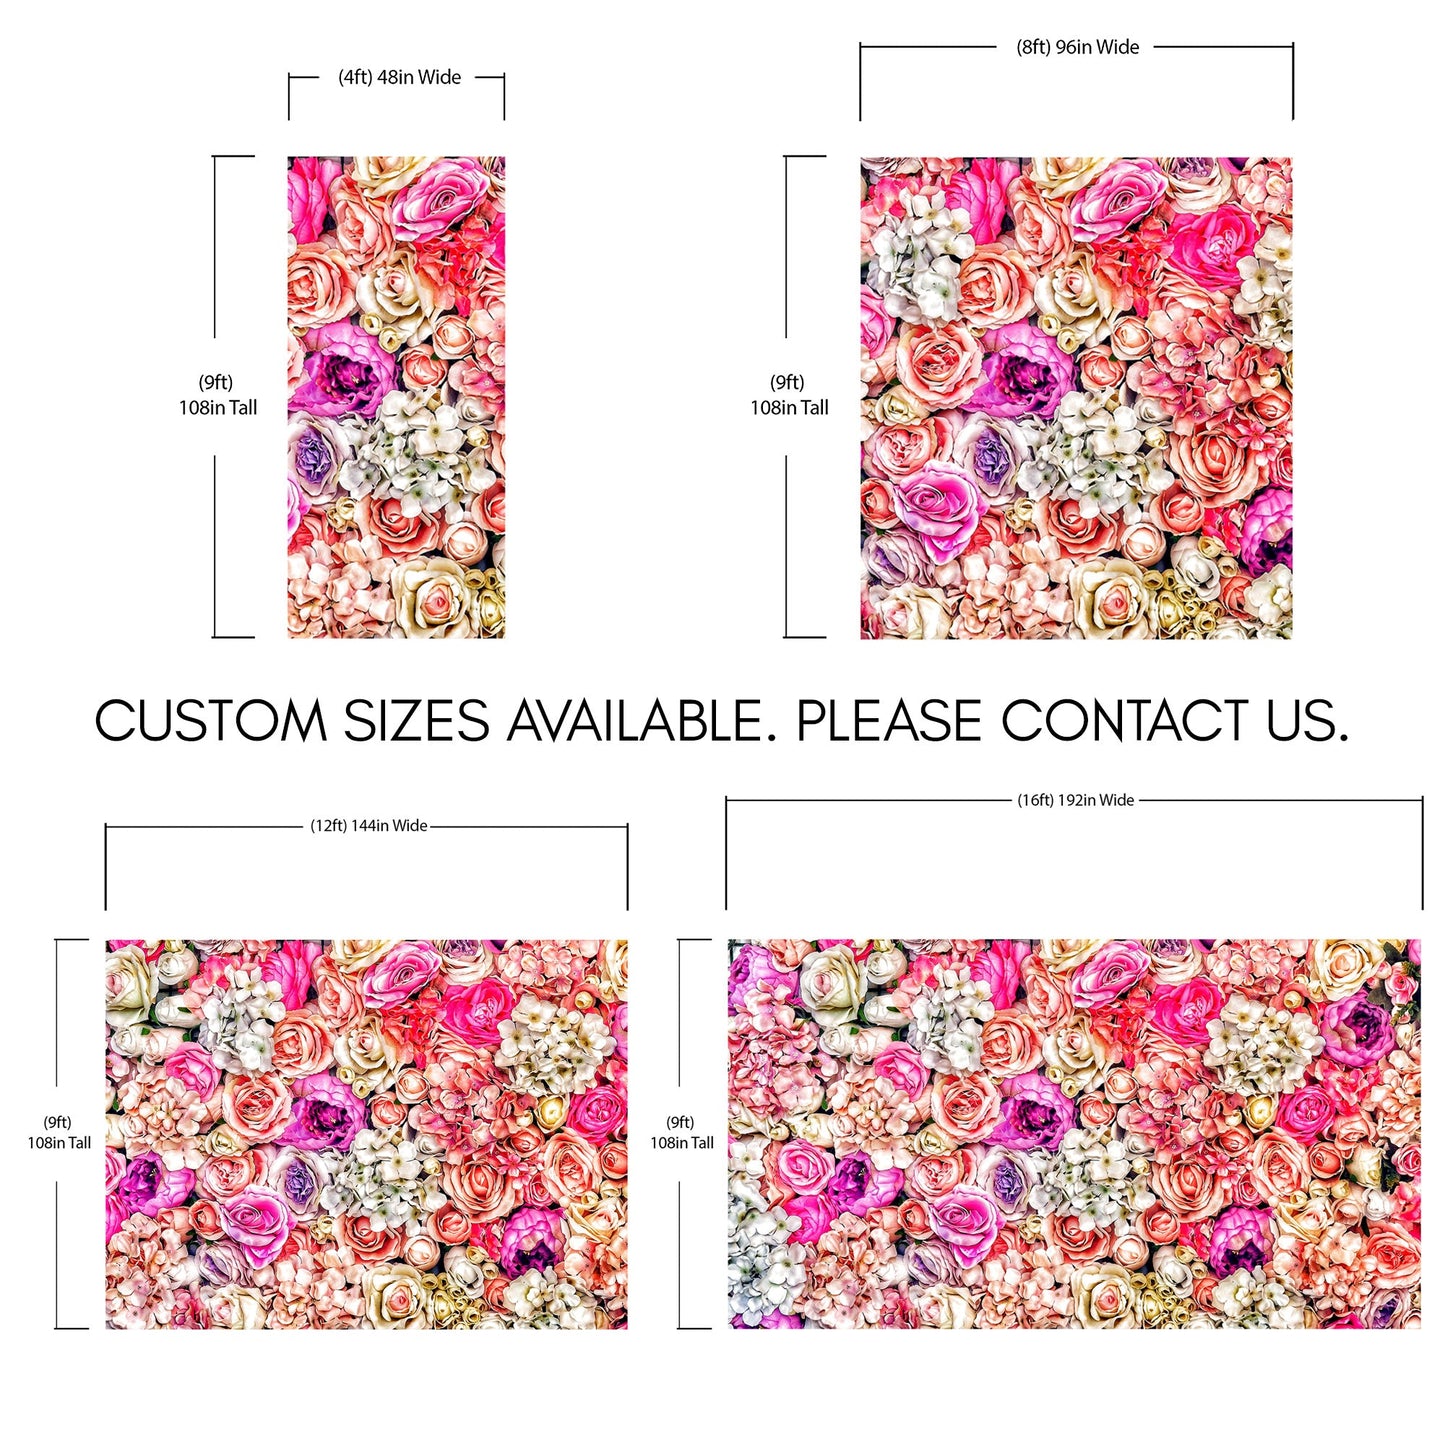 Vibrant Floral Bliss Wallpaper Mural - Colorful Roses and Flower Arrangements #6602